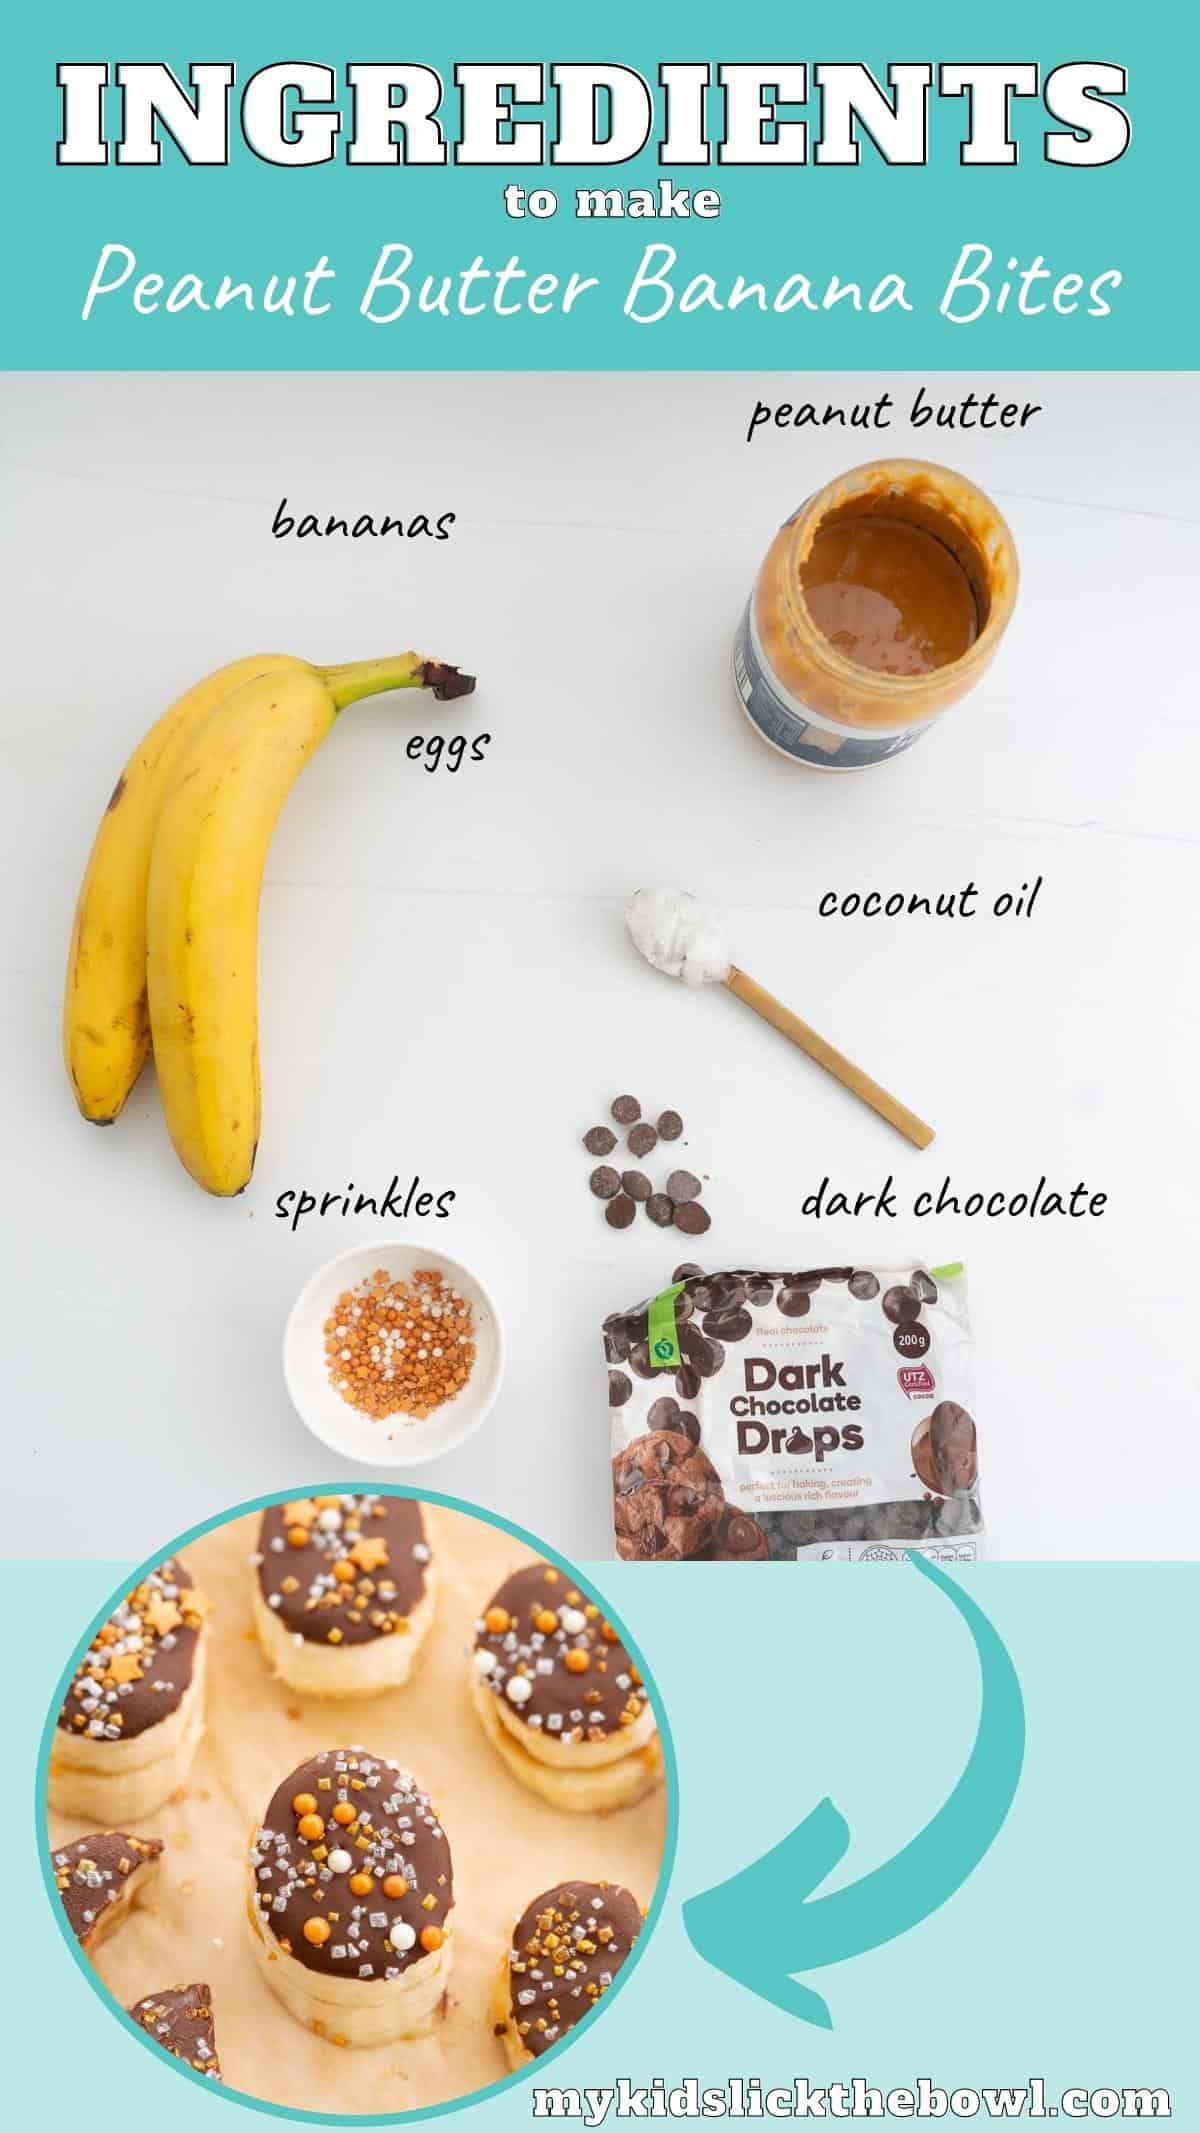 The ingredients to make chocolate peanut butter bananas laid out on a bench top with text overlay.